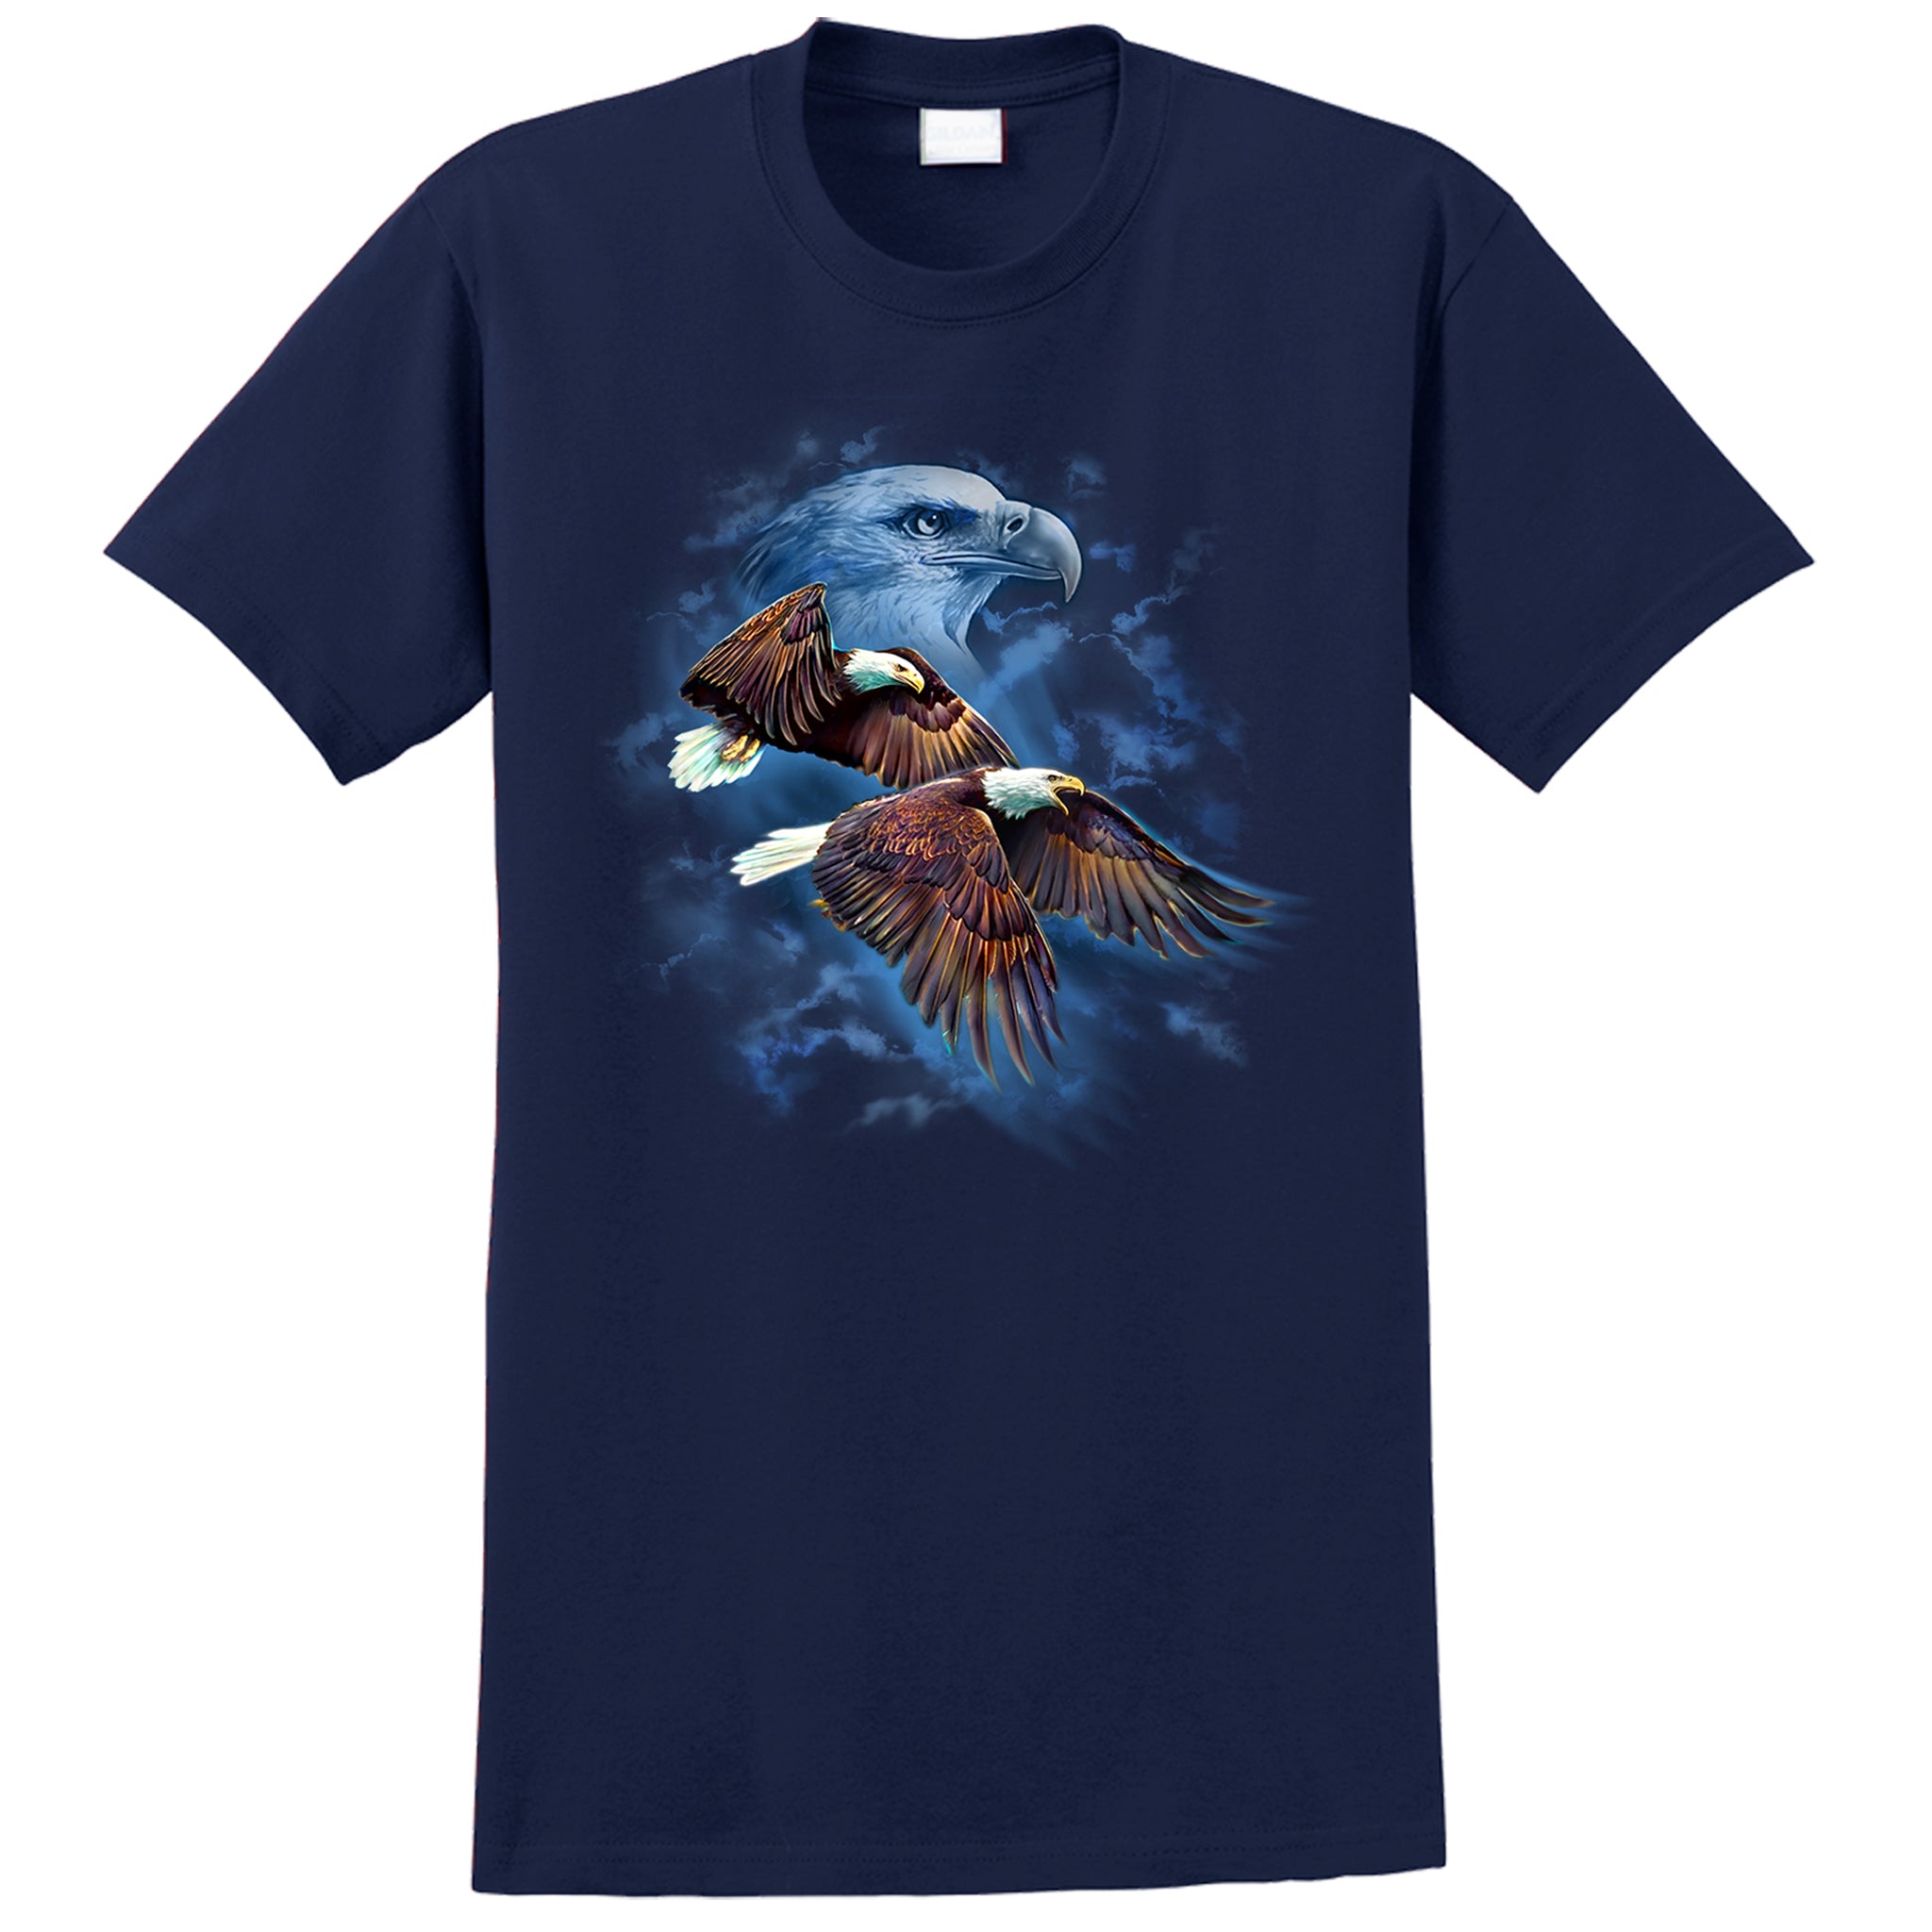 Flying eagles with eagle portrait in the background on 100% cotton adult navy T-shirt. 